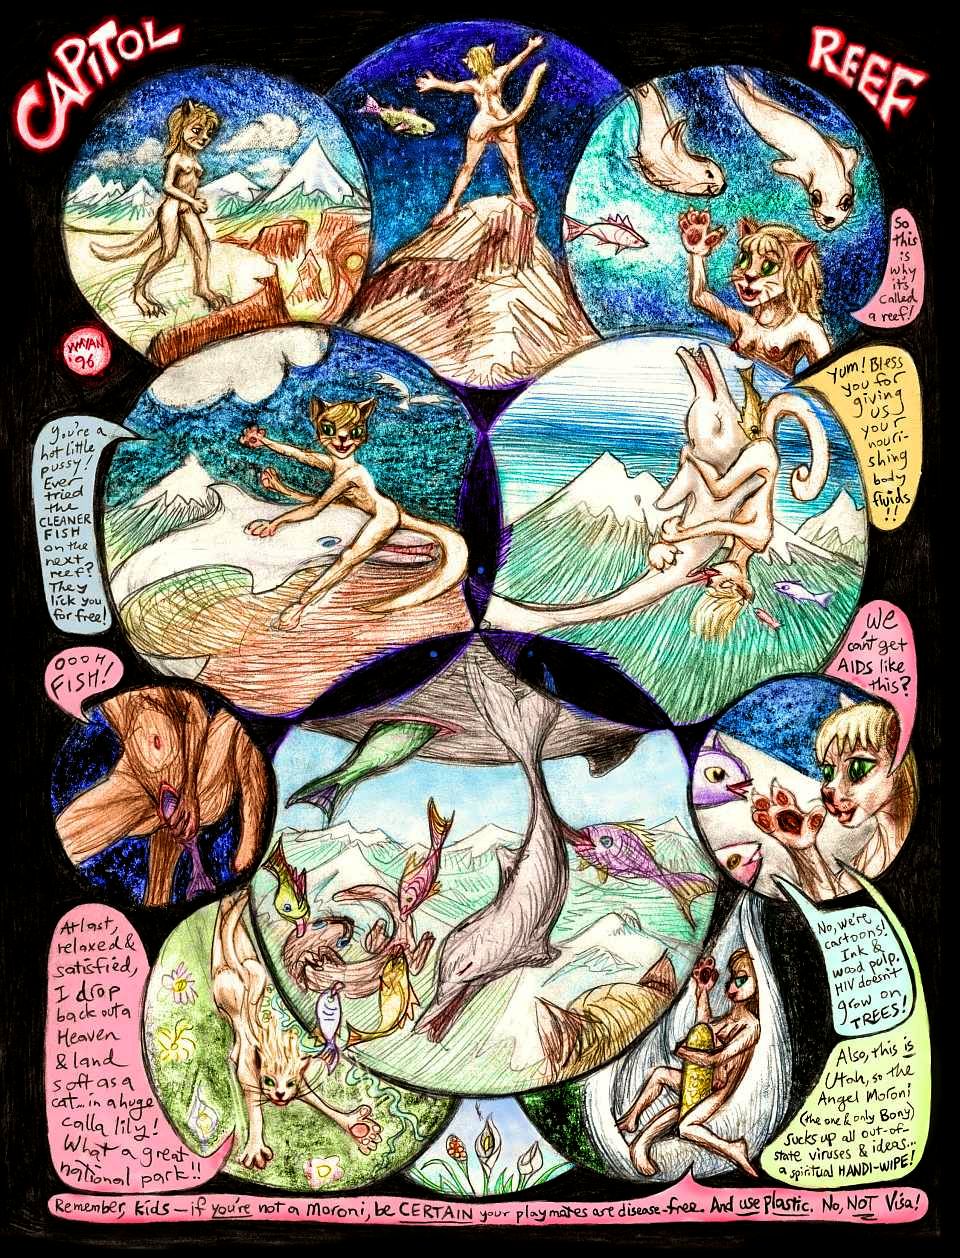 Comics page: I'm a catgirl wandering Capitol Reef, a coral reef in a desert valley between snowy peaks. Fish, seals and dolphins swim in mid-air! We all visit a cleaner-station where fish lick and suck us. I worry about HIV but the cleaners reassure us we're all paper and ink